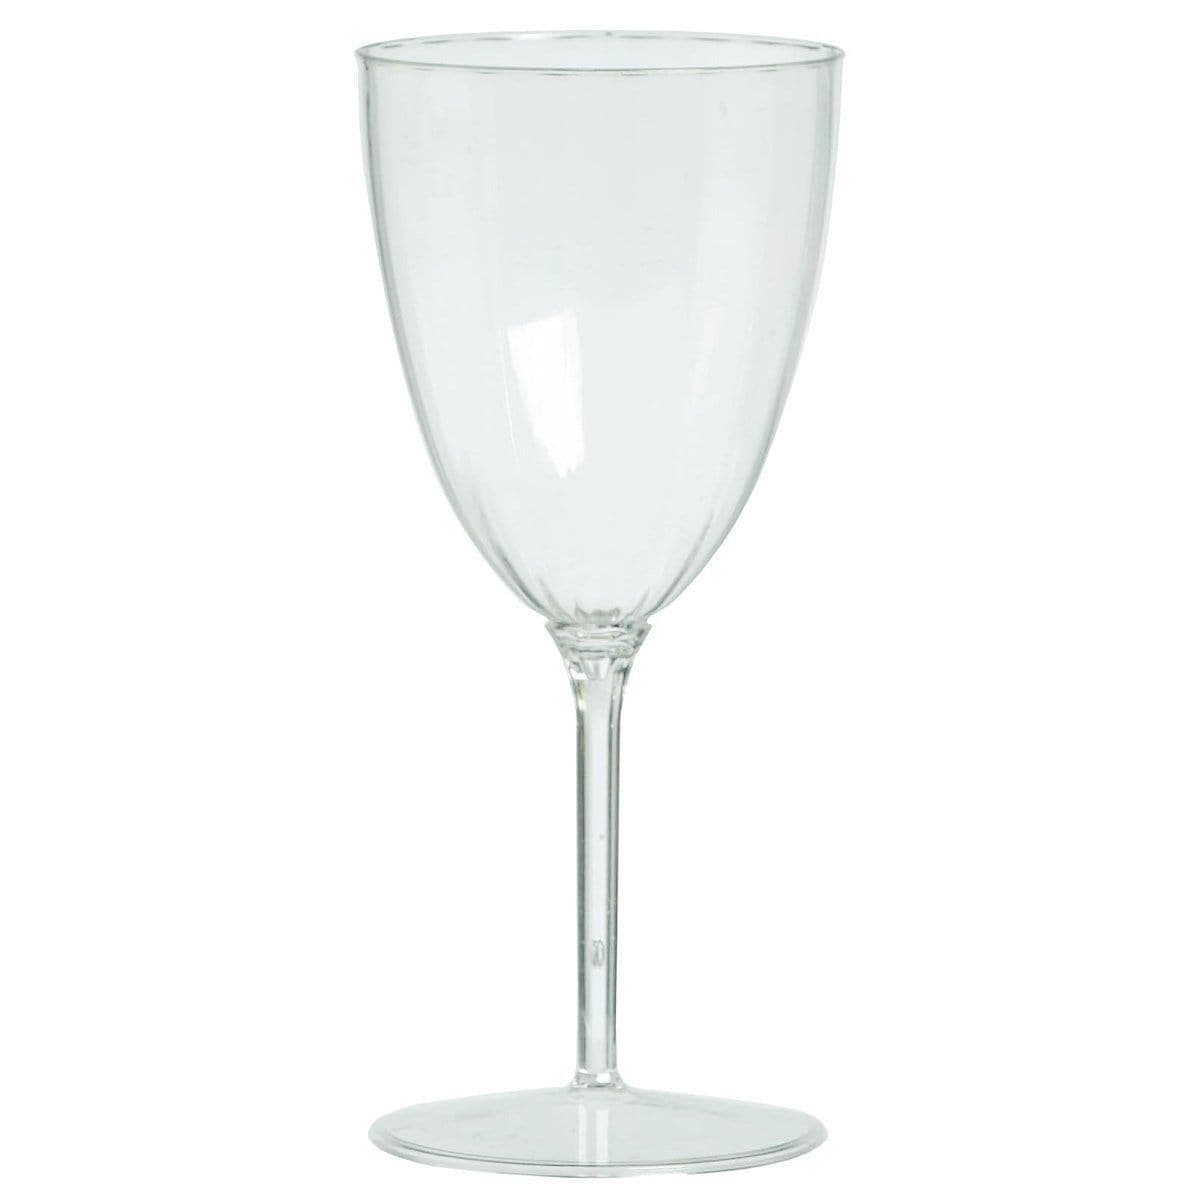 Buy Plasticware Wine Glasses - Clear 8 Oz 8/pkg. sold at Party Expert